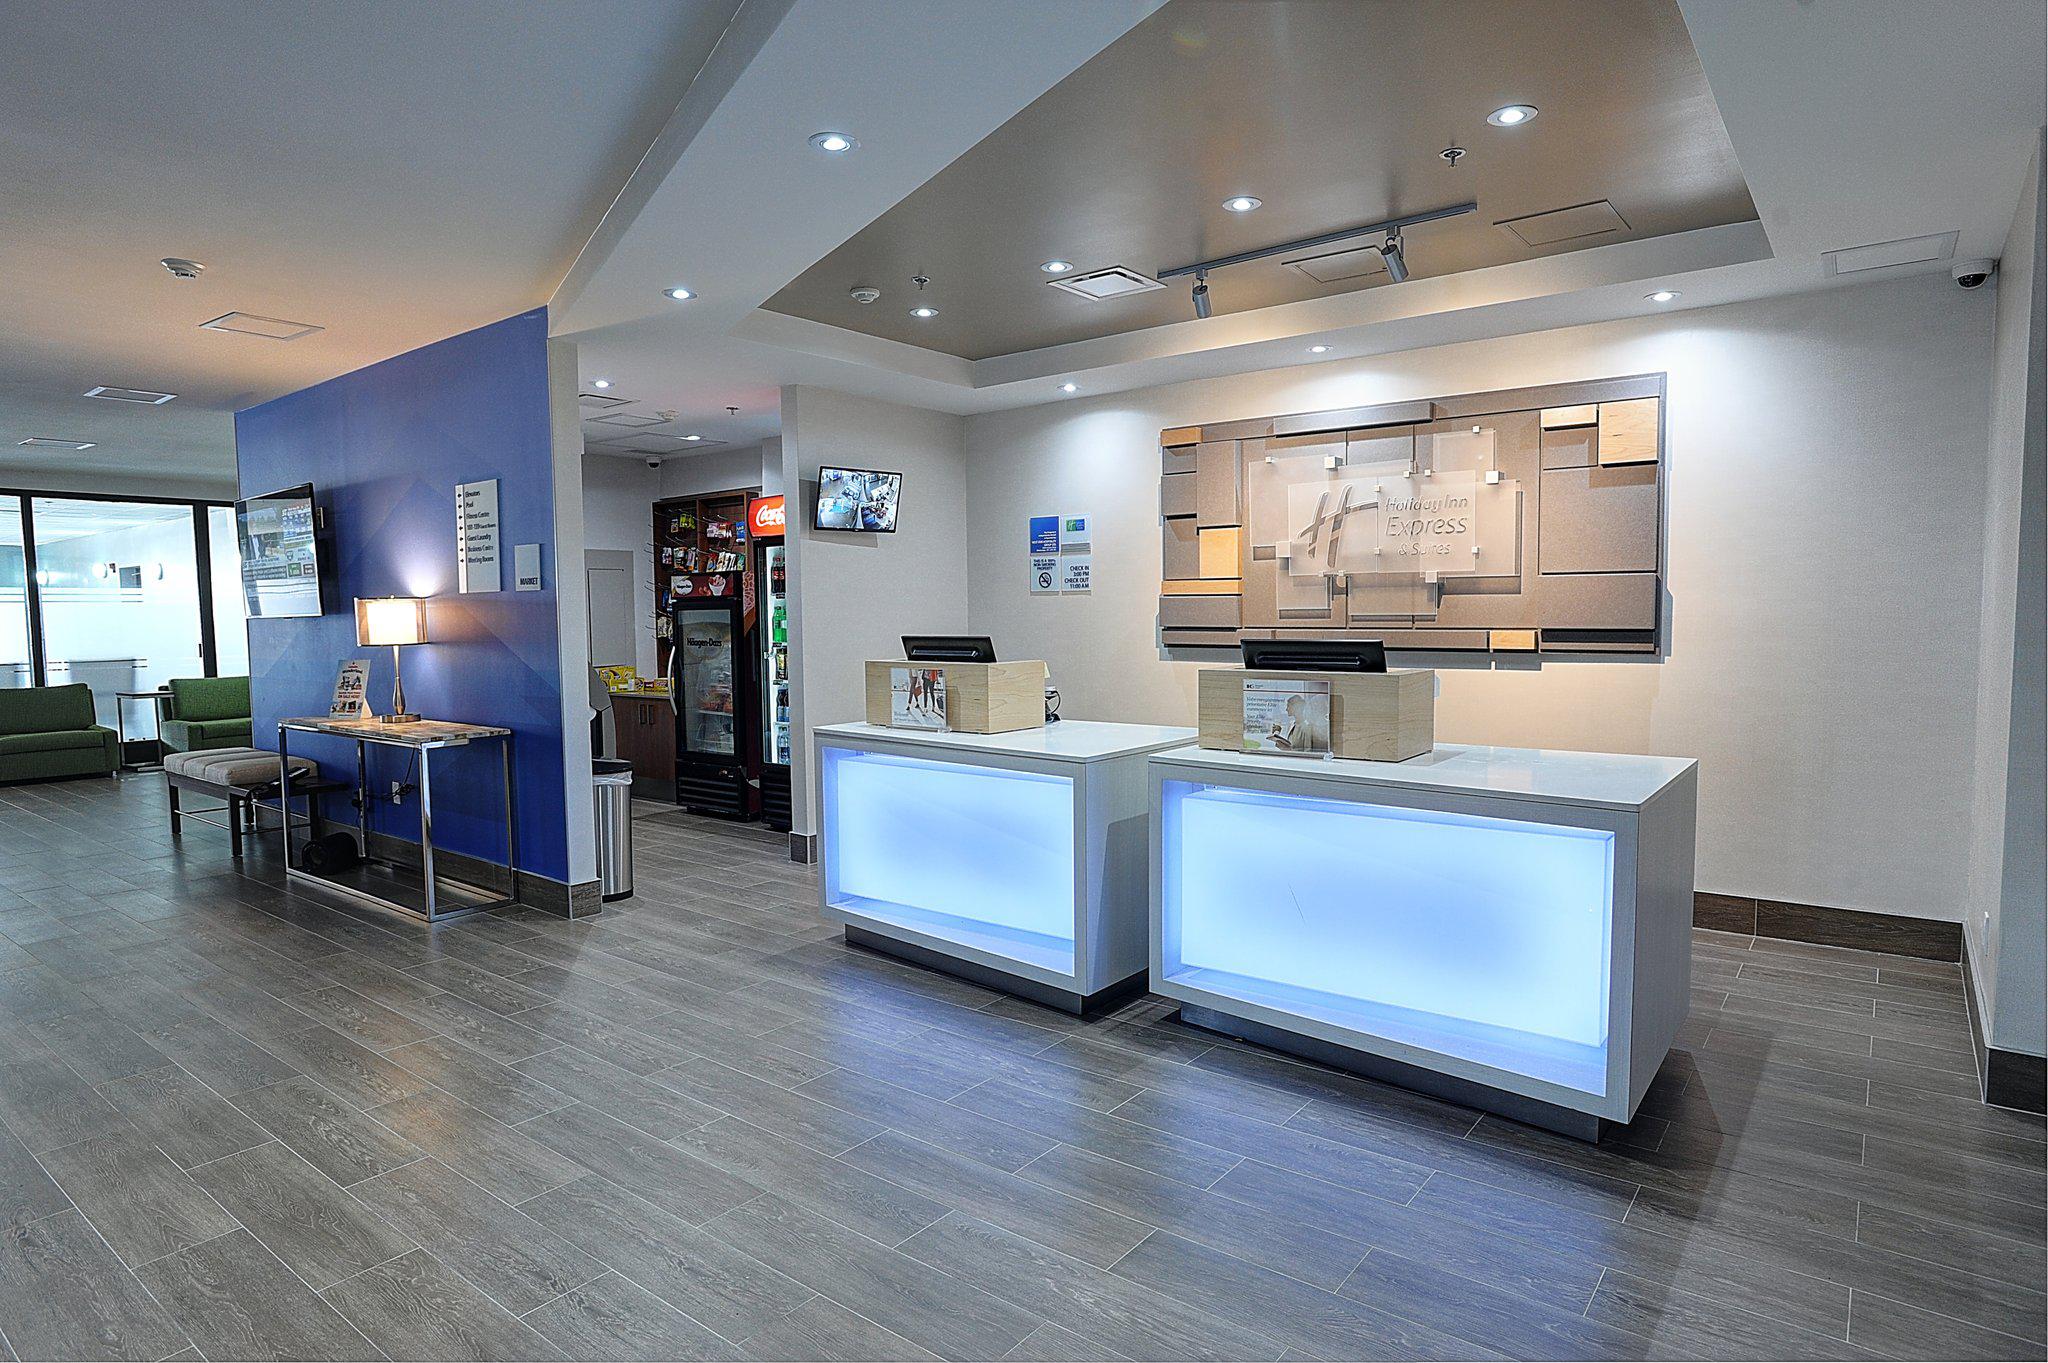 Holiday Inn Express & Suites Toronto Airport West, an IHG Hotel Mississauga (905)624-9500